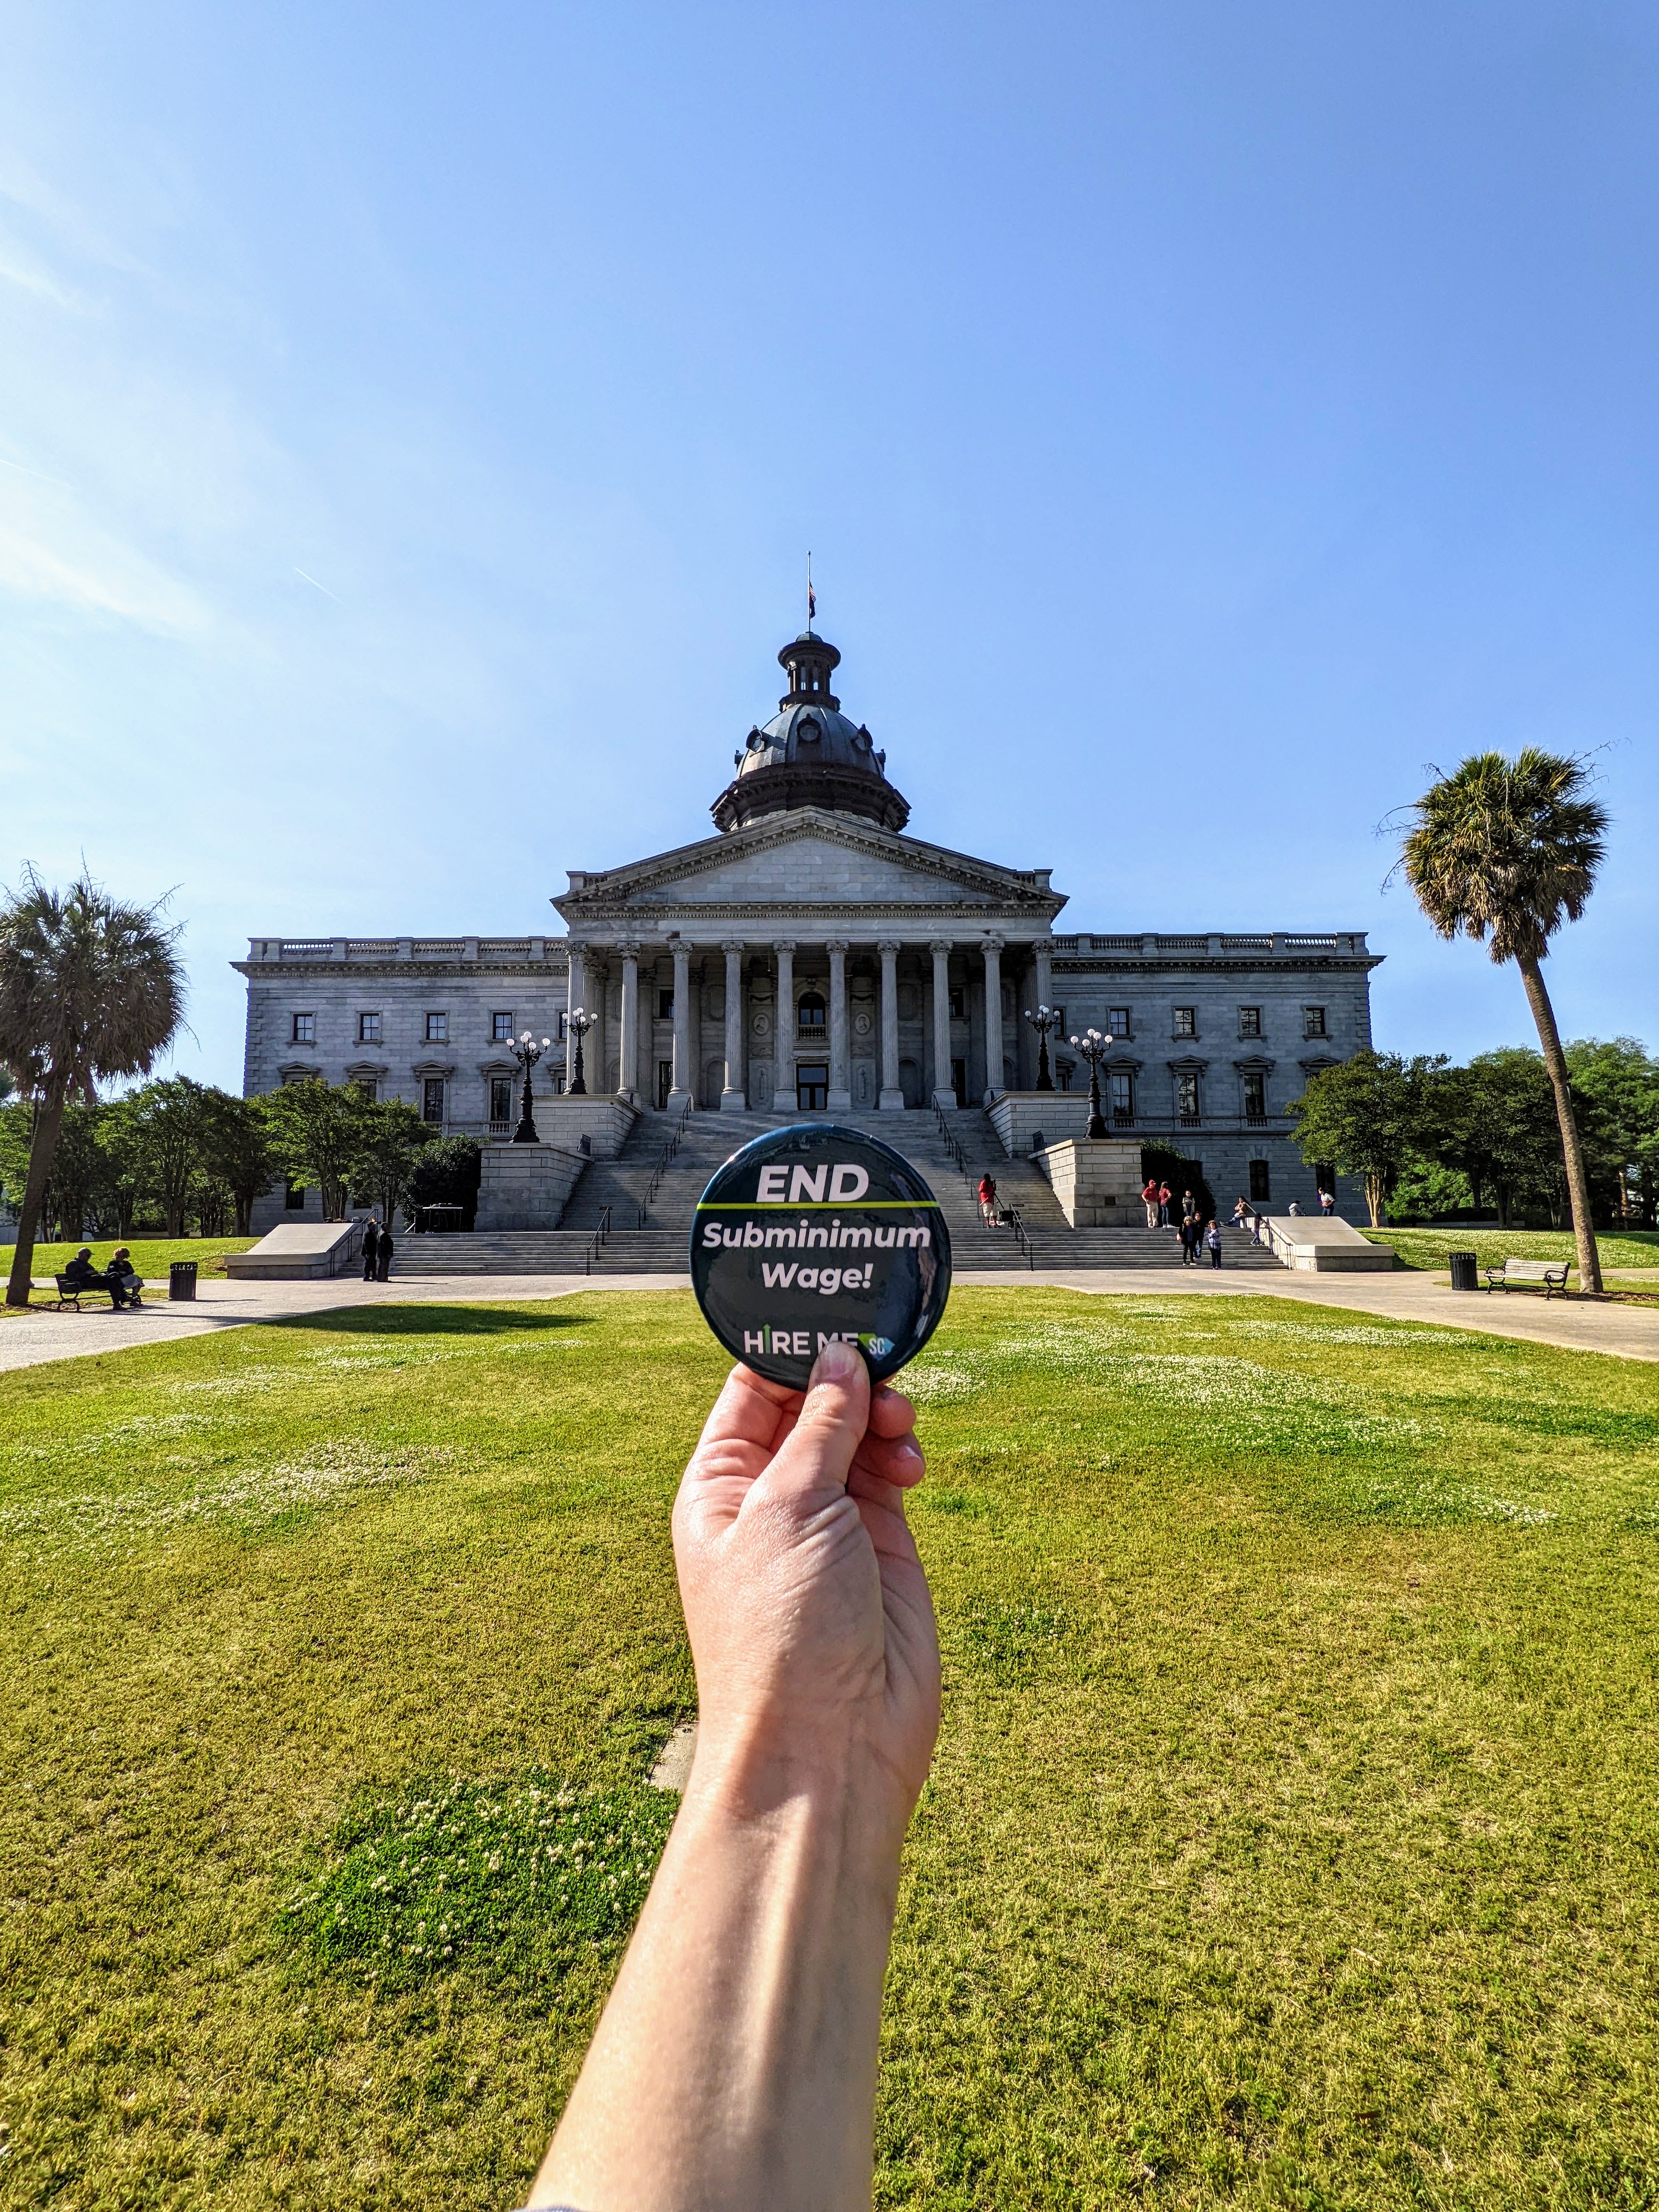 Photograph of South Carolina State House in the background behind a hand holding a button that reads 'End subminimum wage,' with the hire me sc logo, in the foreground.